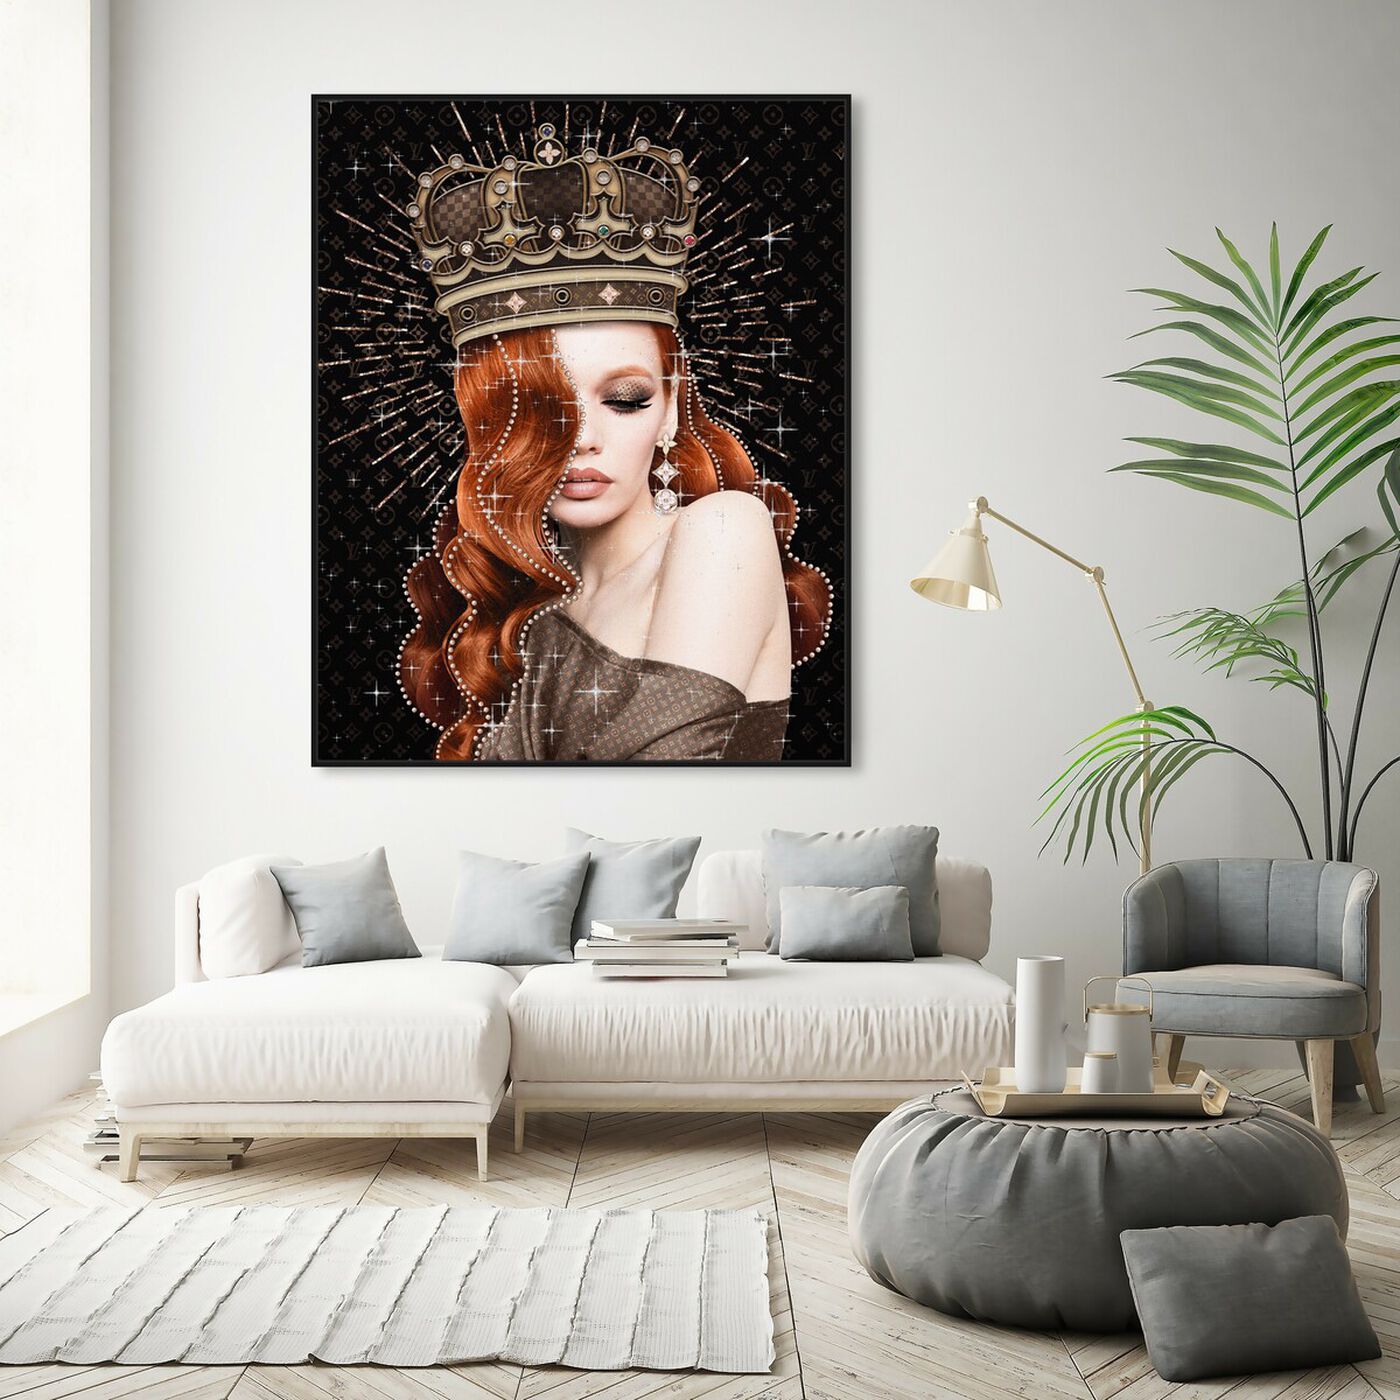 Hanging view of Merida Queen featuring fashion and glam and portraits art.